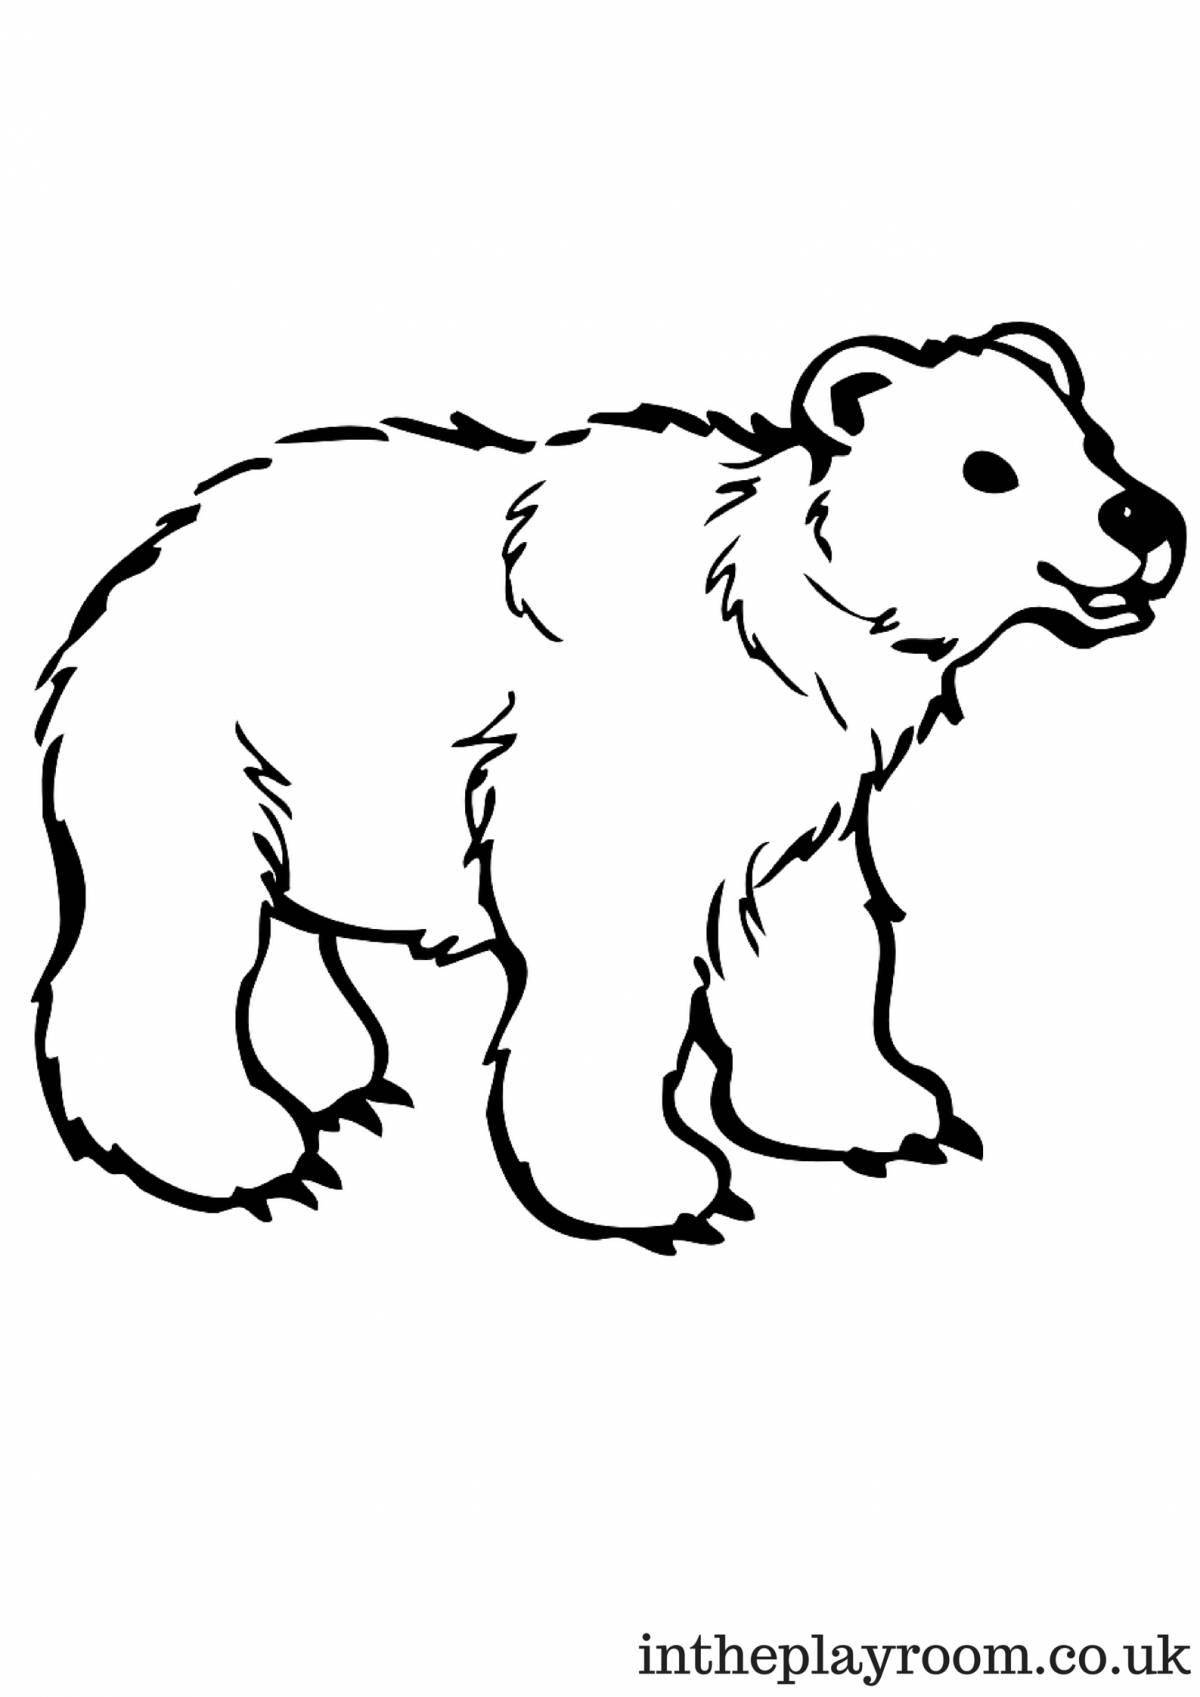 Coloring book hugging white and brown bear